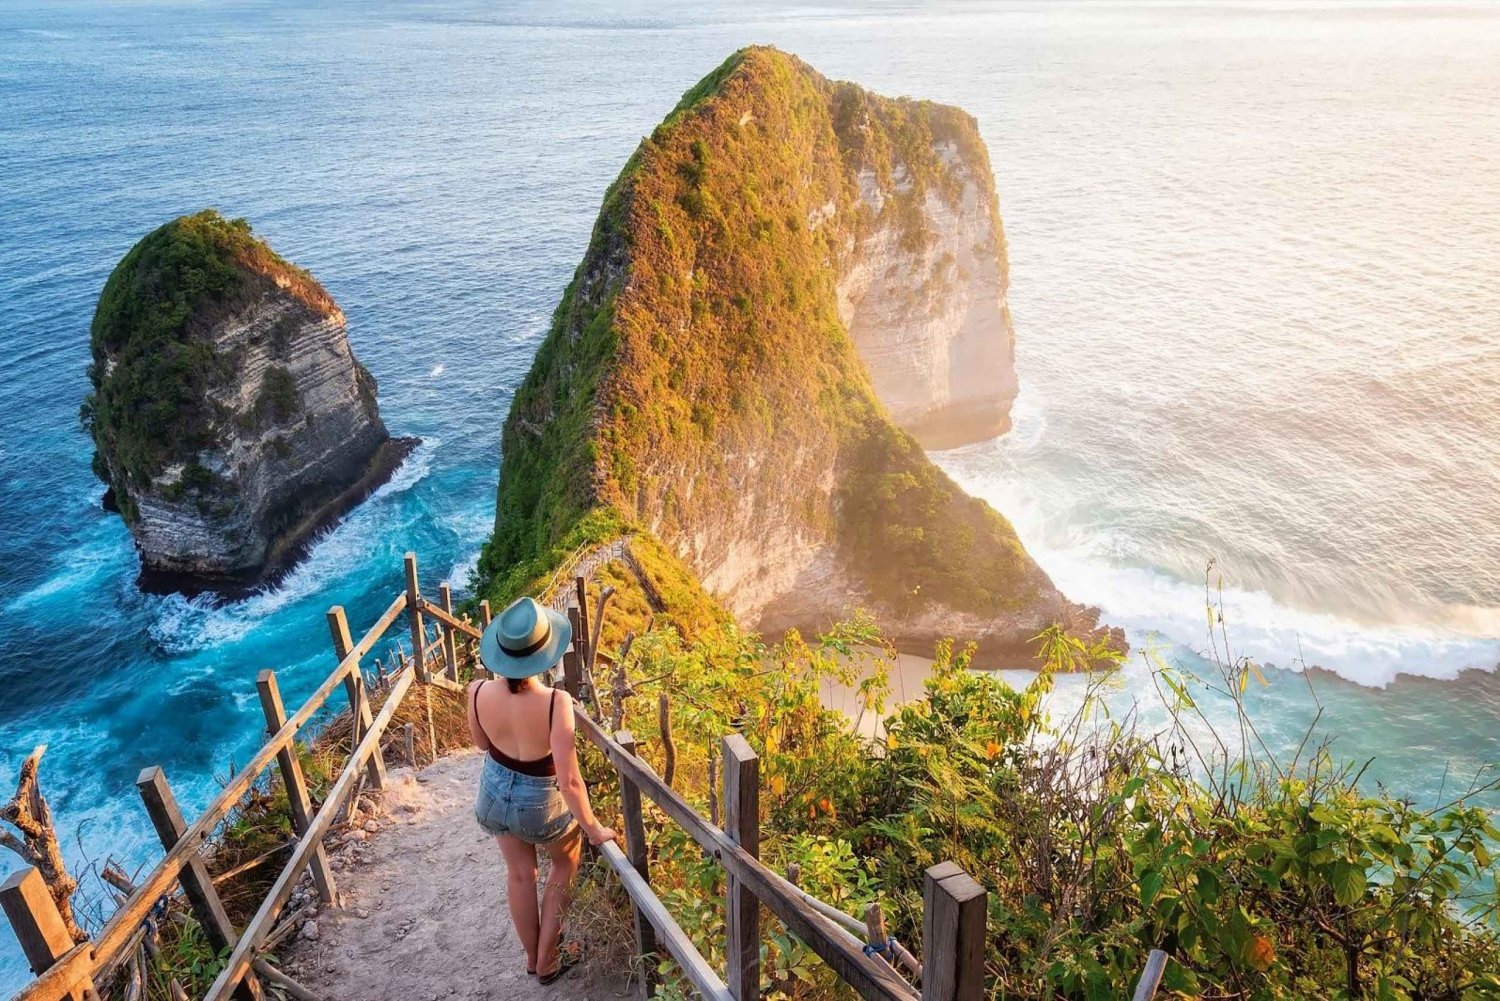 Nusa Penida Full-Day Tour with Transfer from Bali